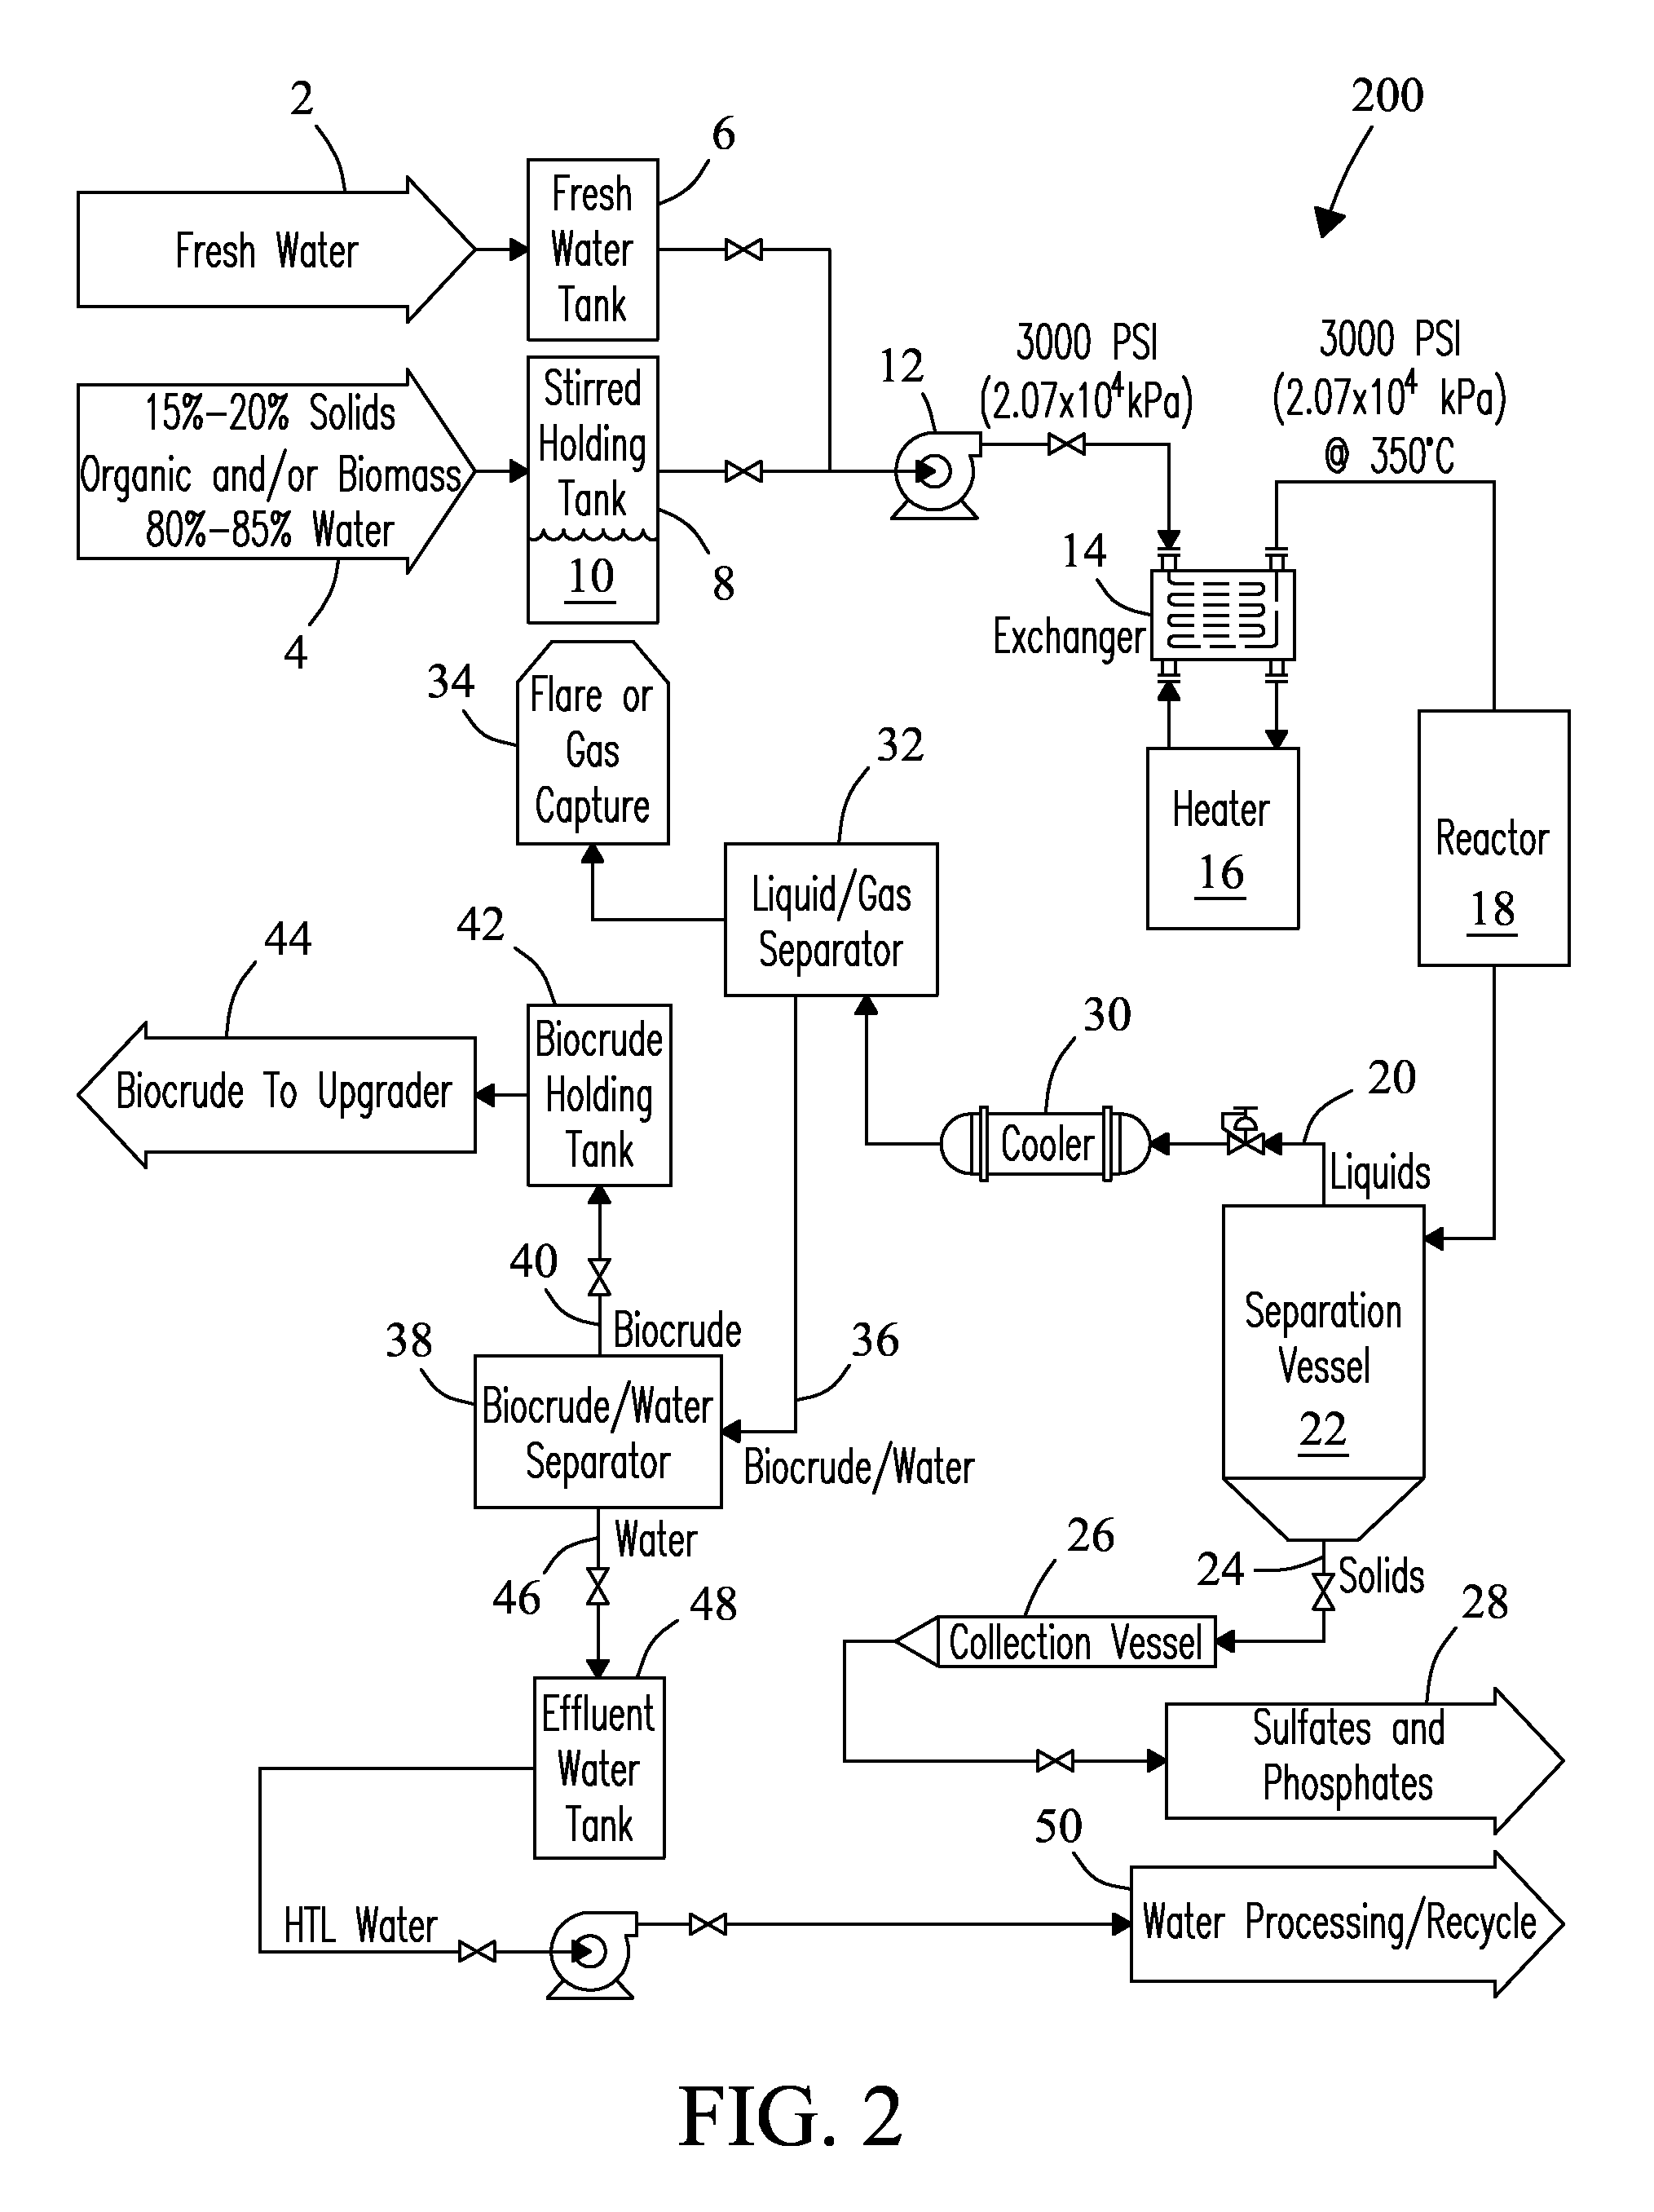 System and process for efficient separation of biocrudes and water in a hydrothermal liquefaction system